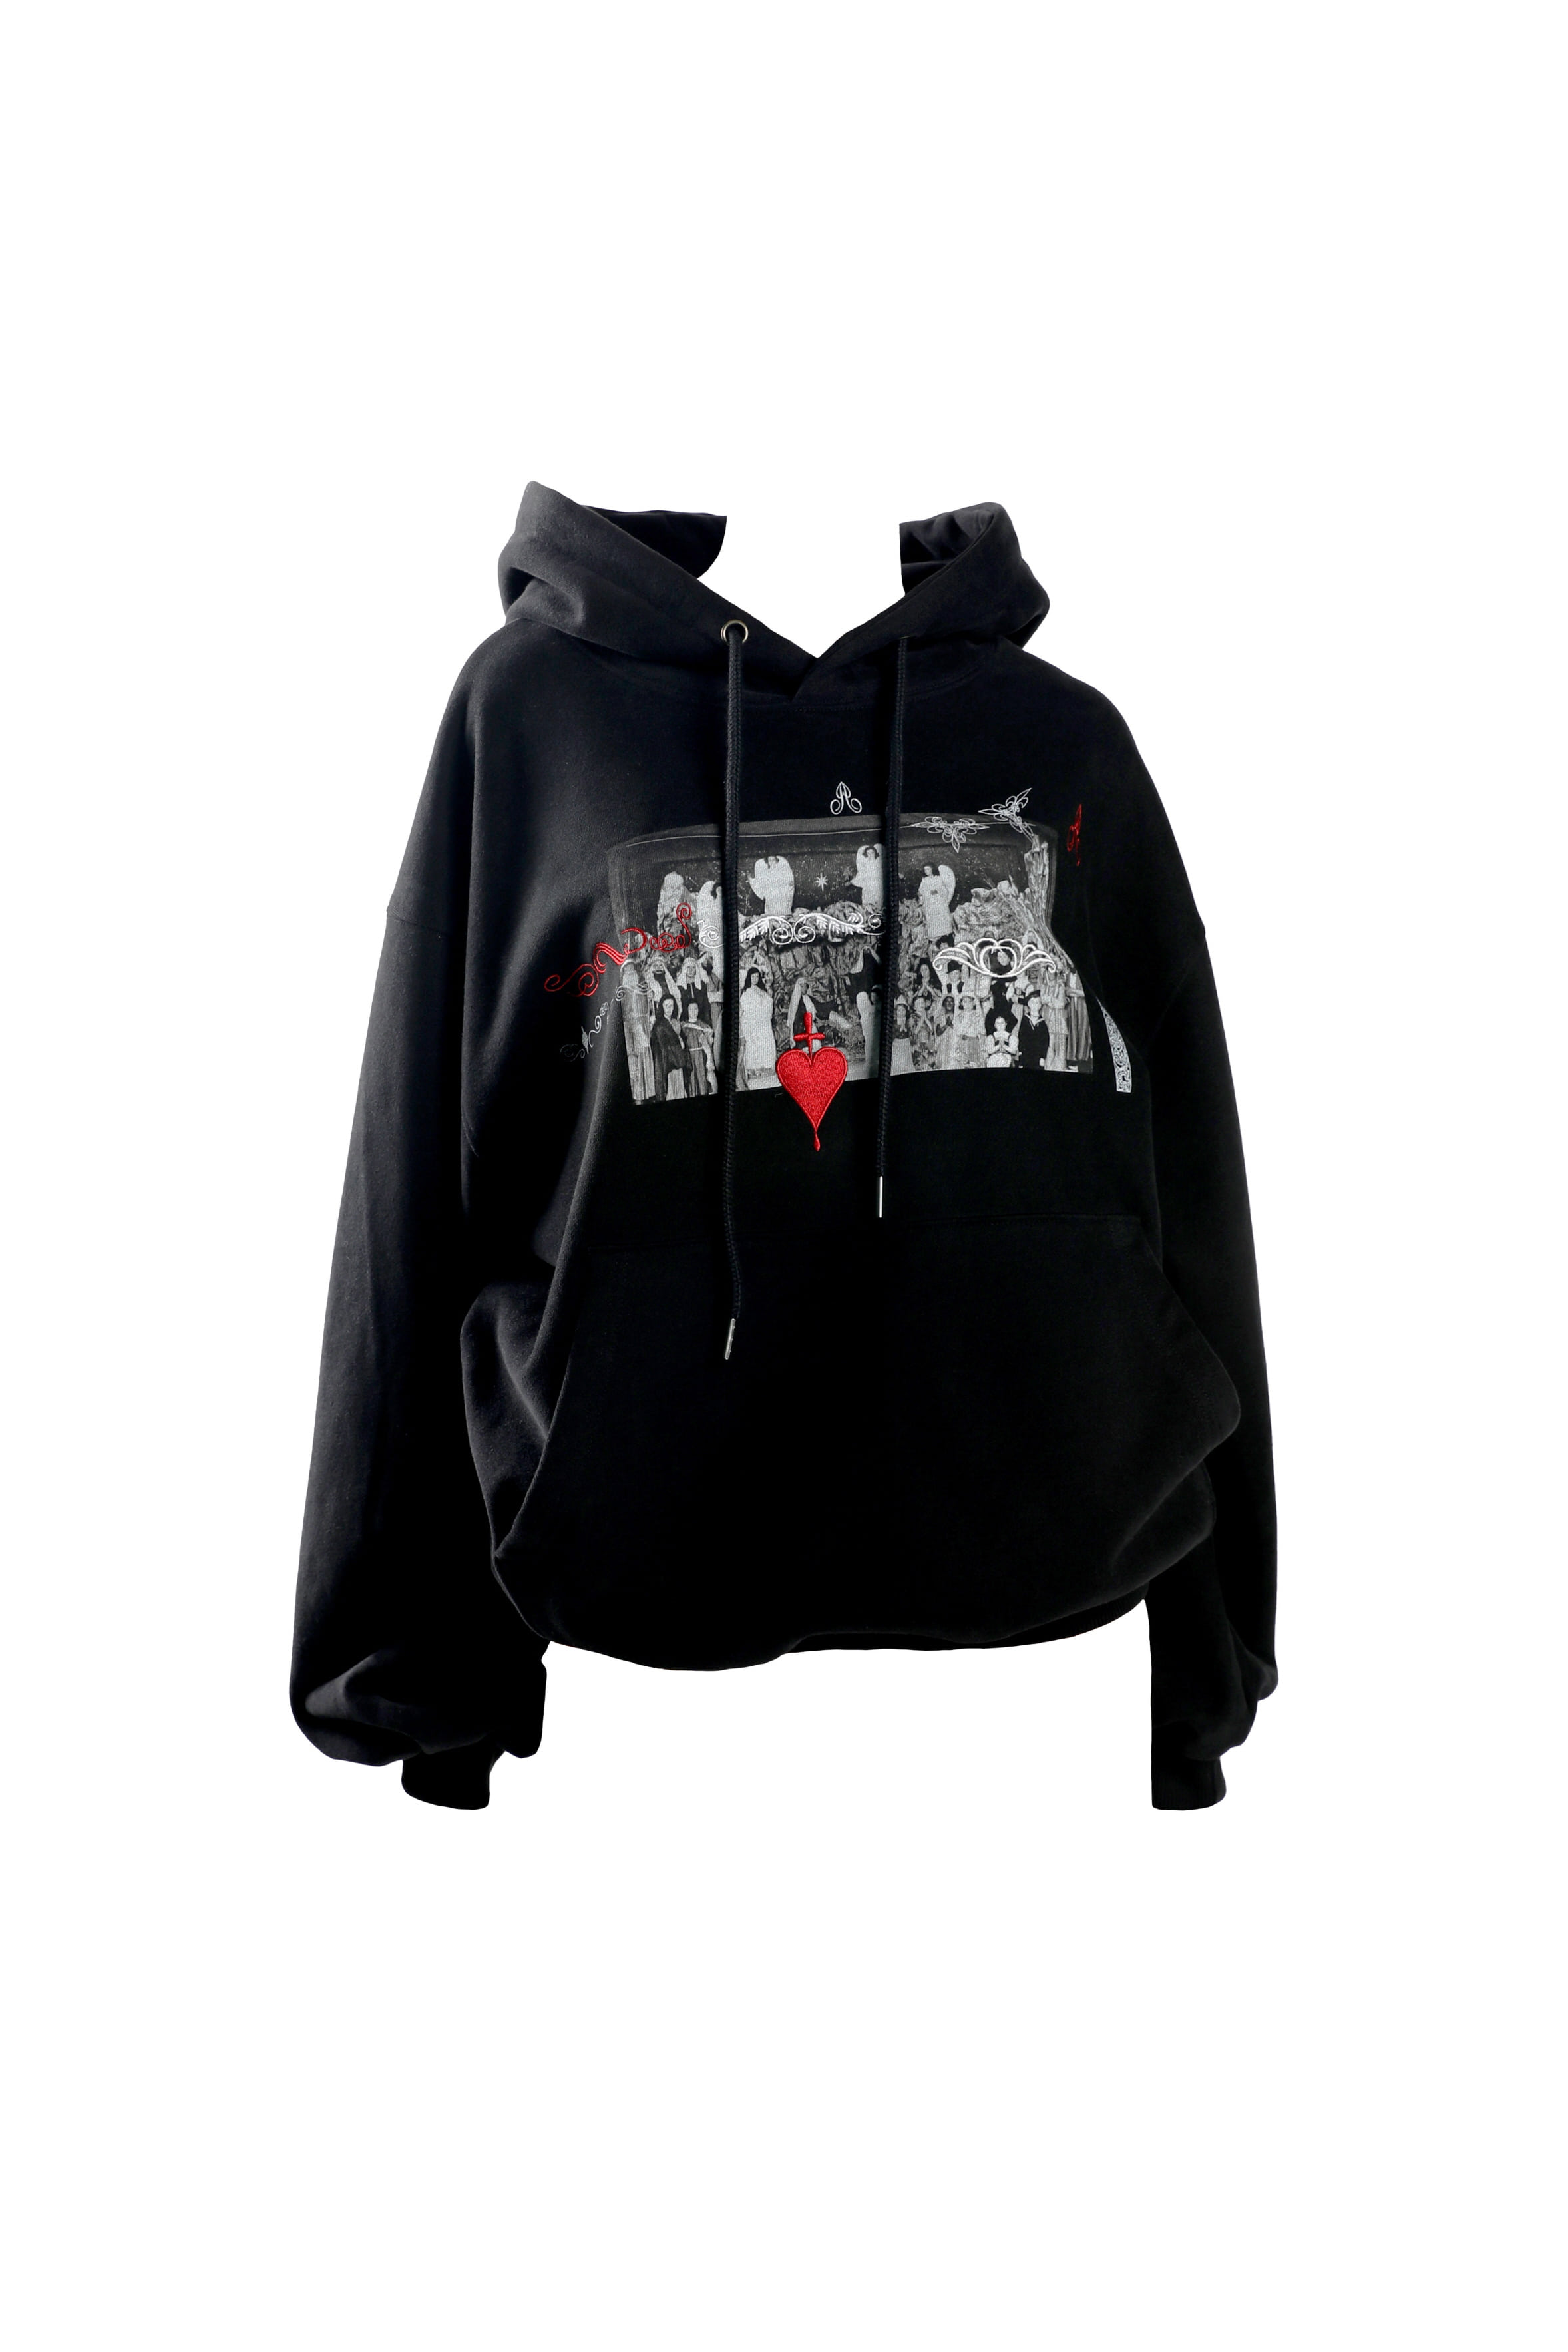 [only 3] Theater club hoodie ver.2 (black)